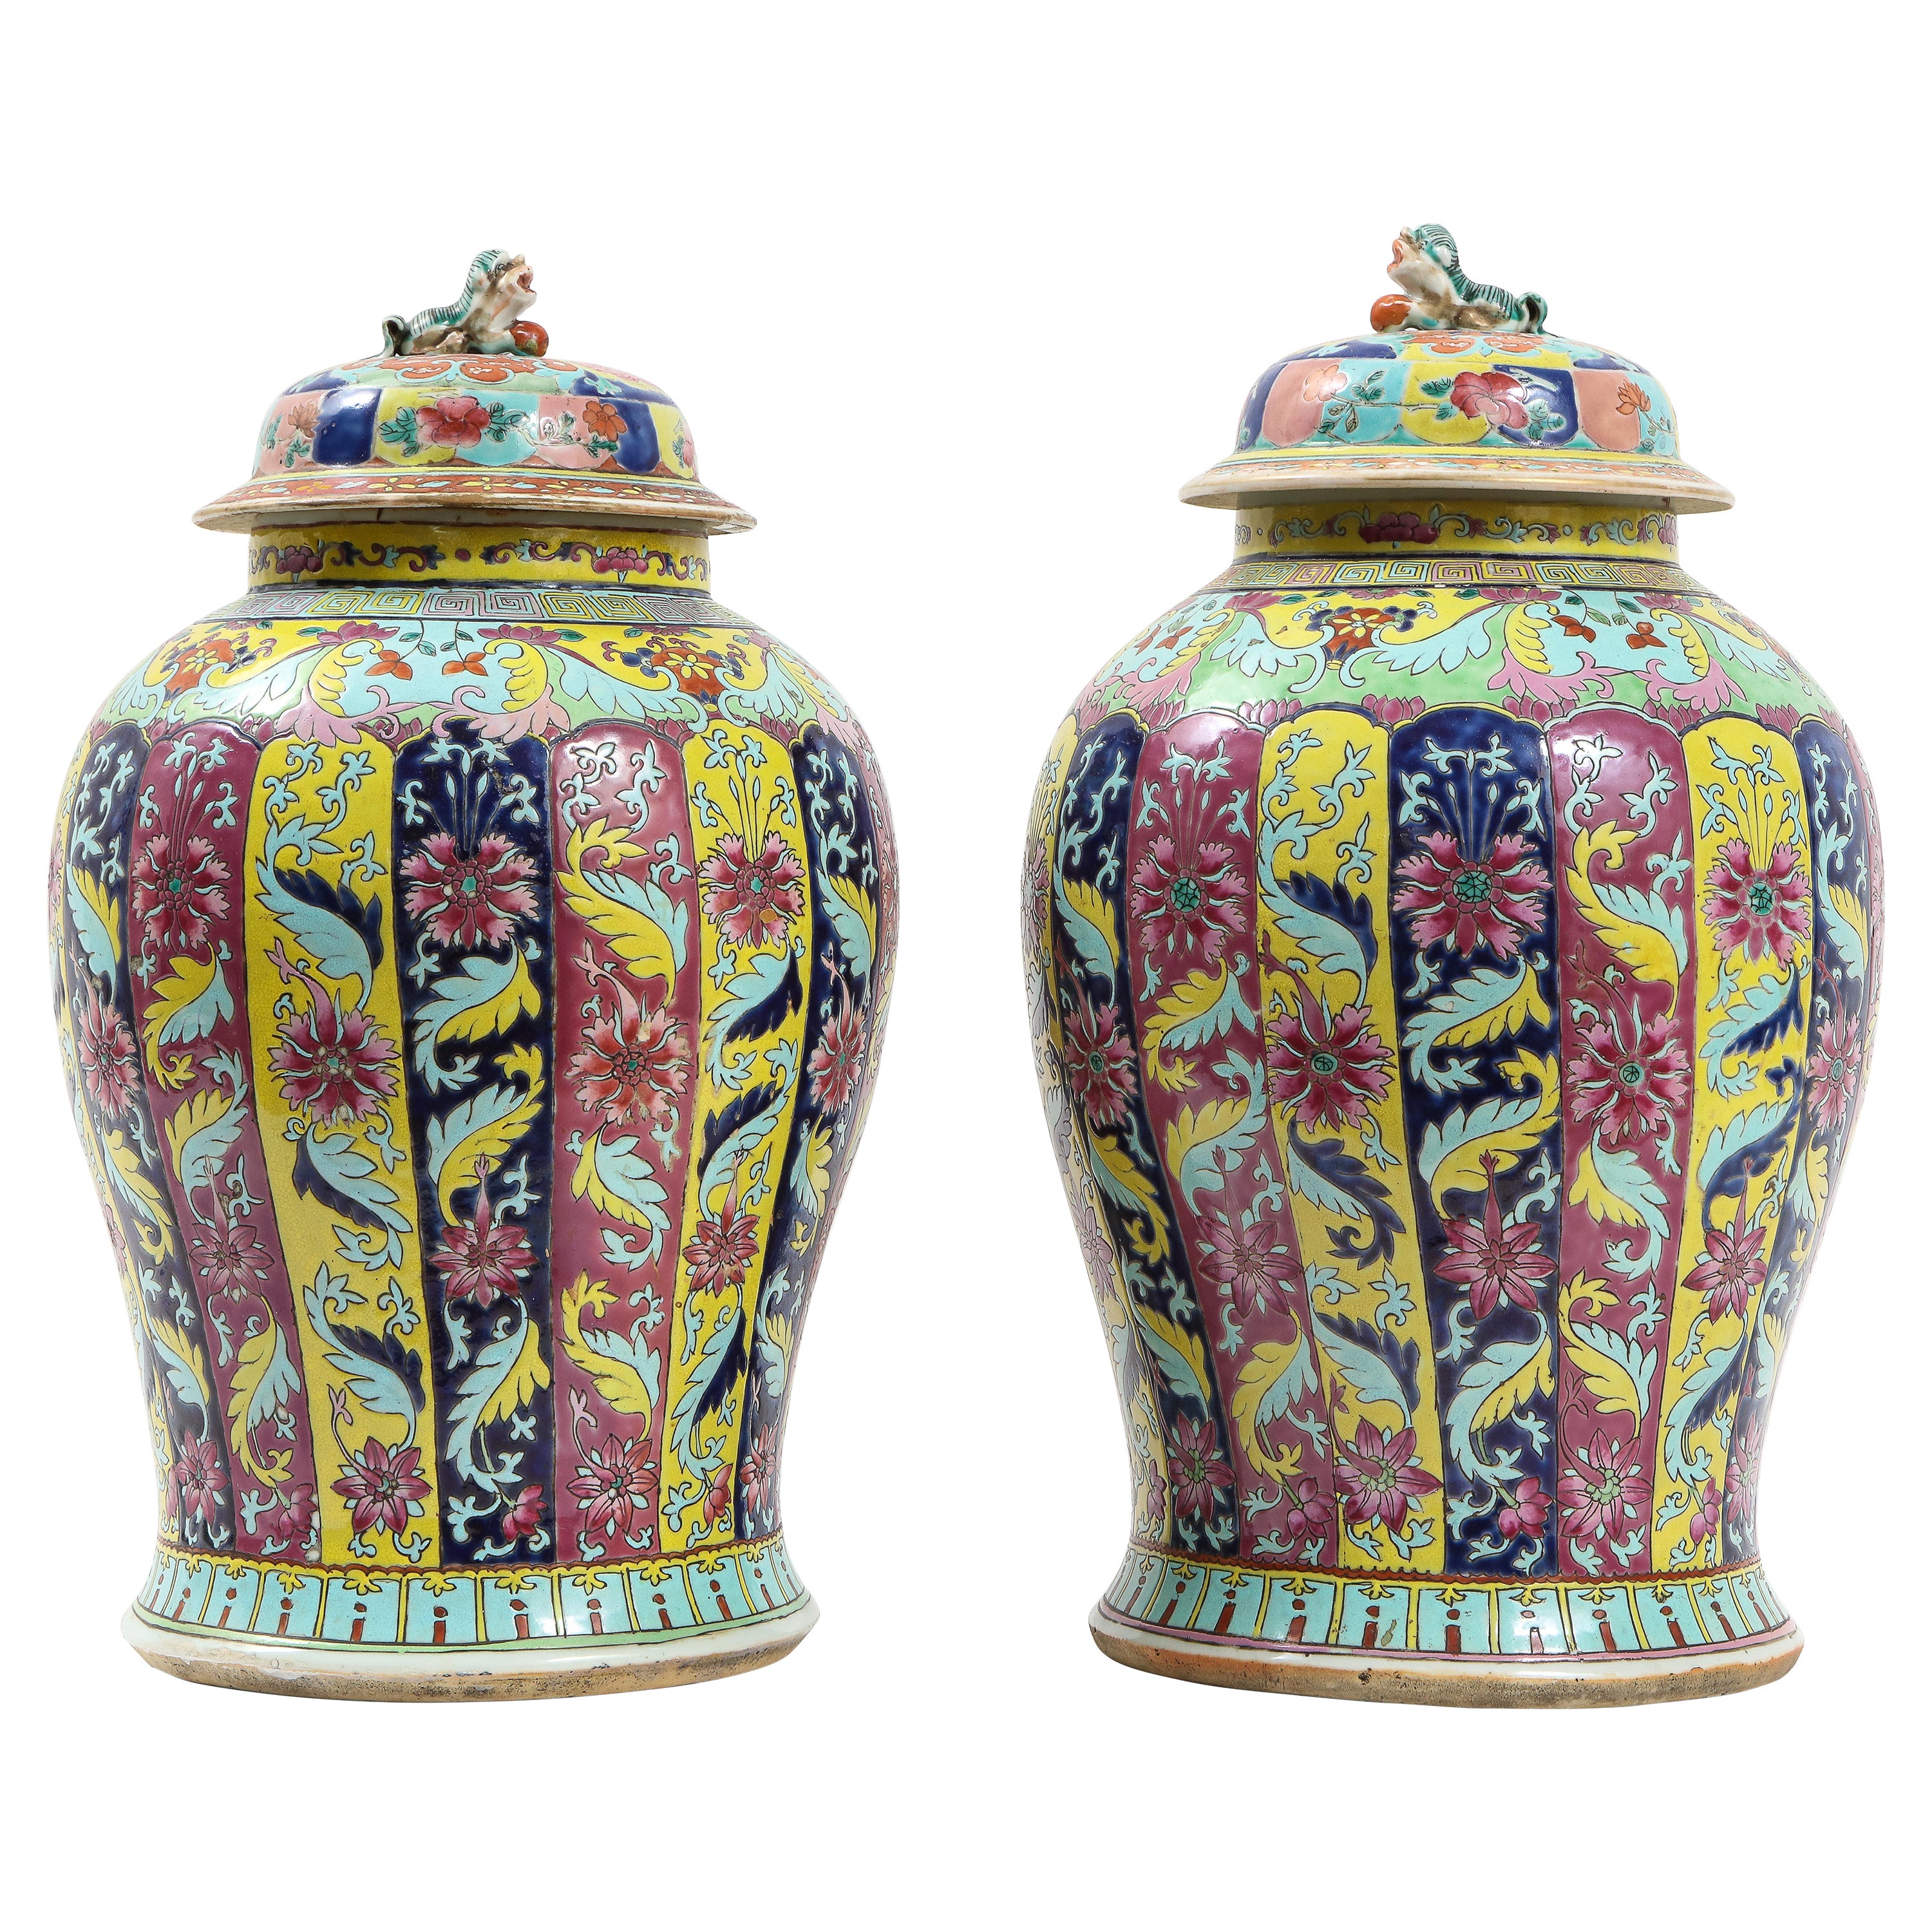 Pr. 19th Century Famille Rose Baluster Form Covered Vases, Henry Ford Collection For Sale